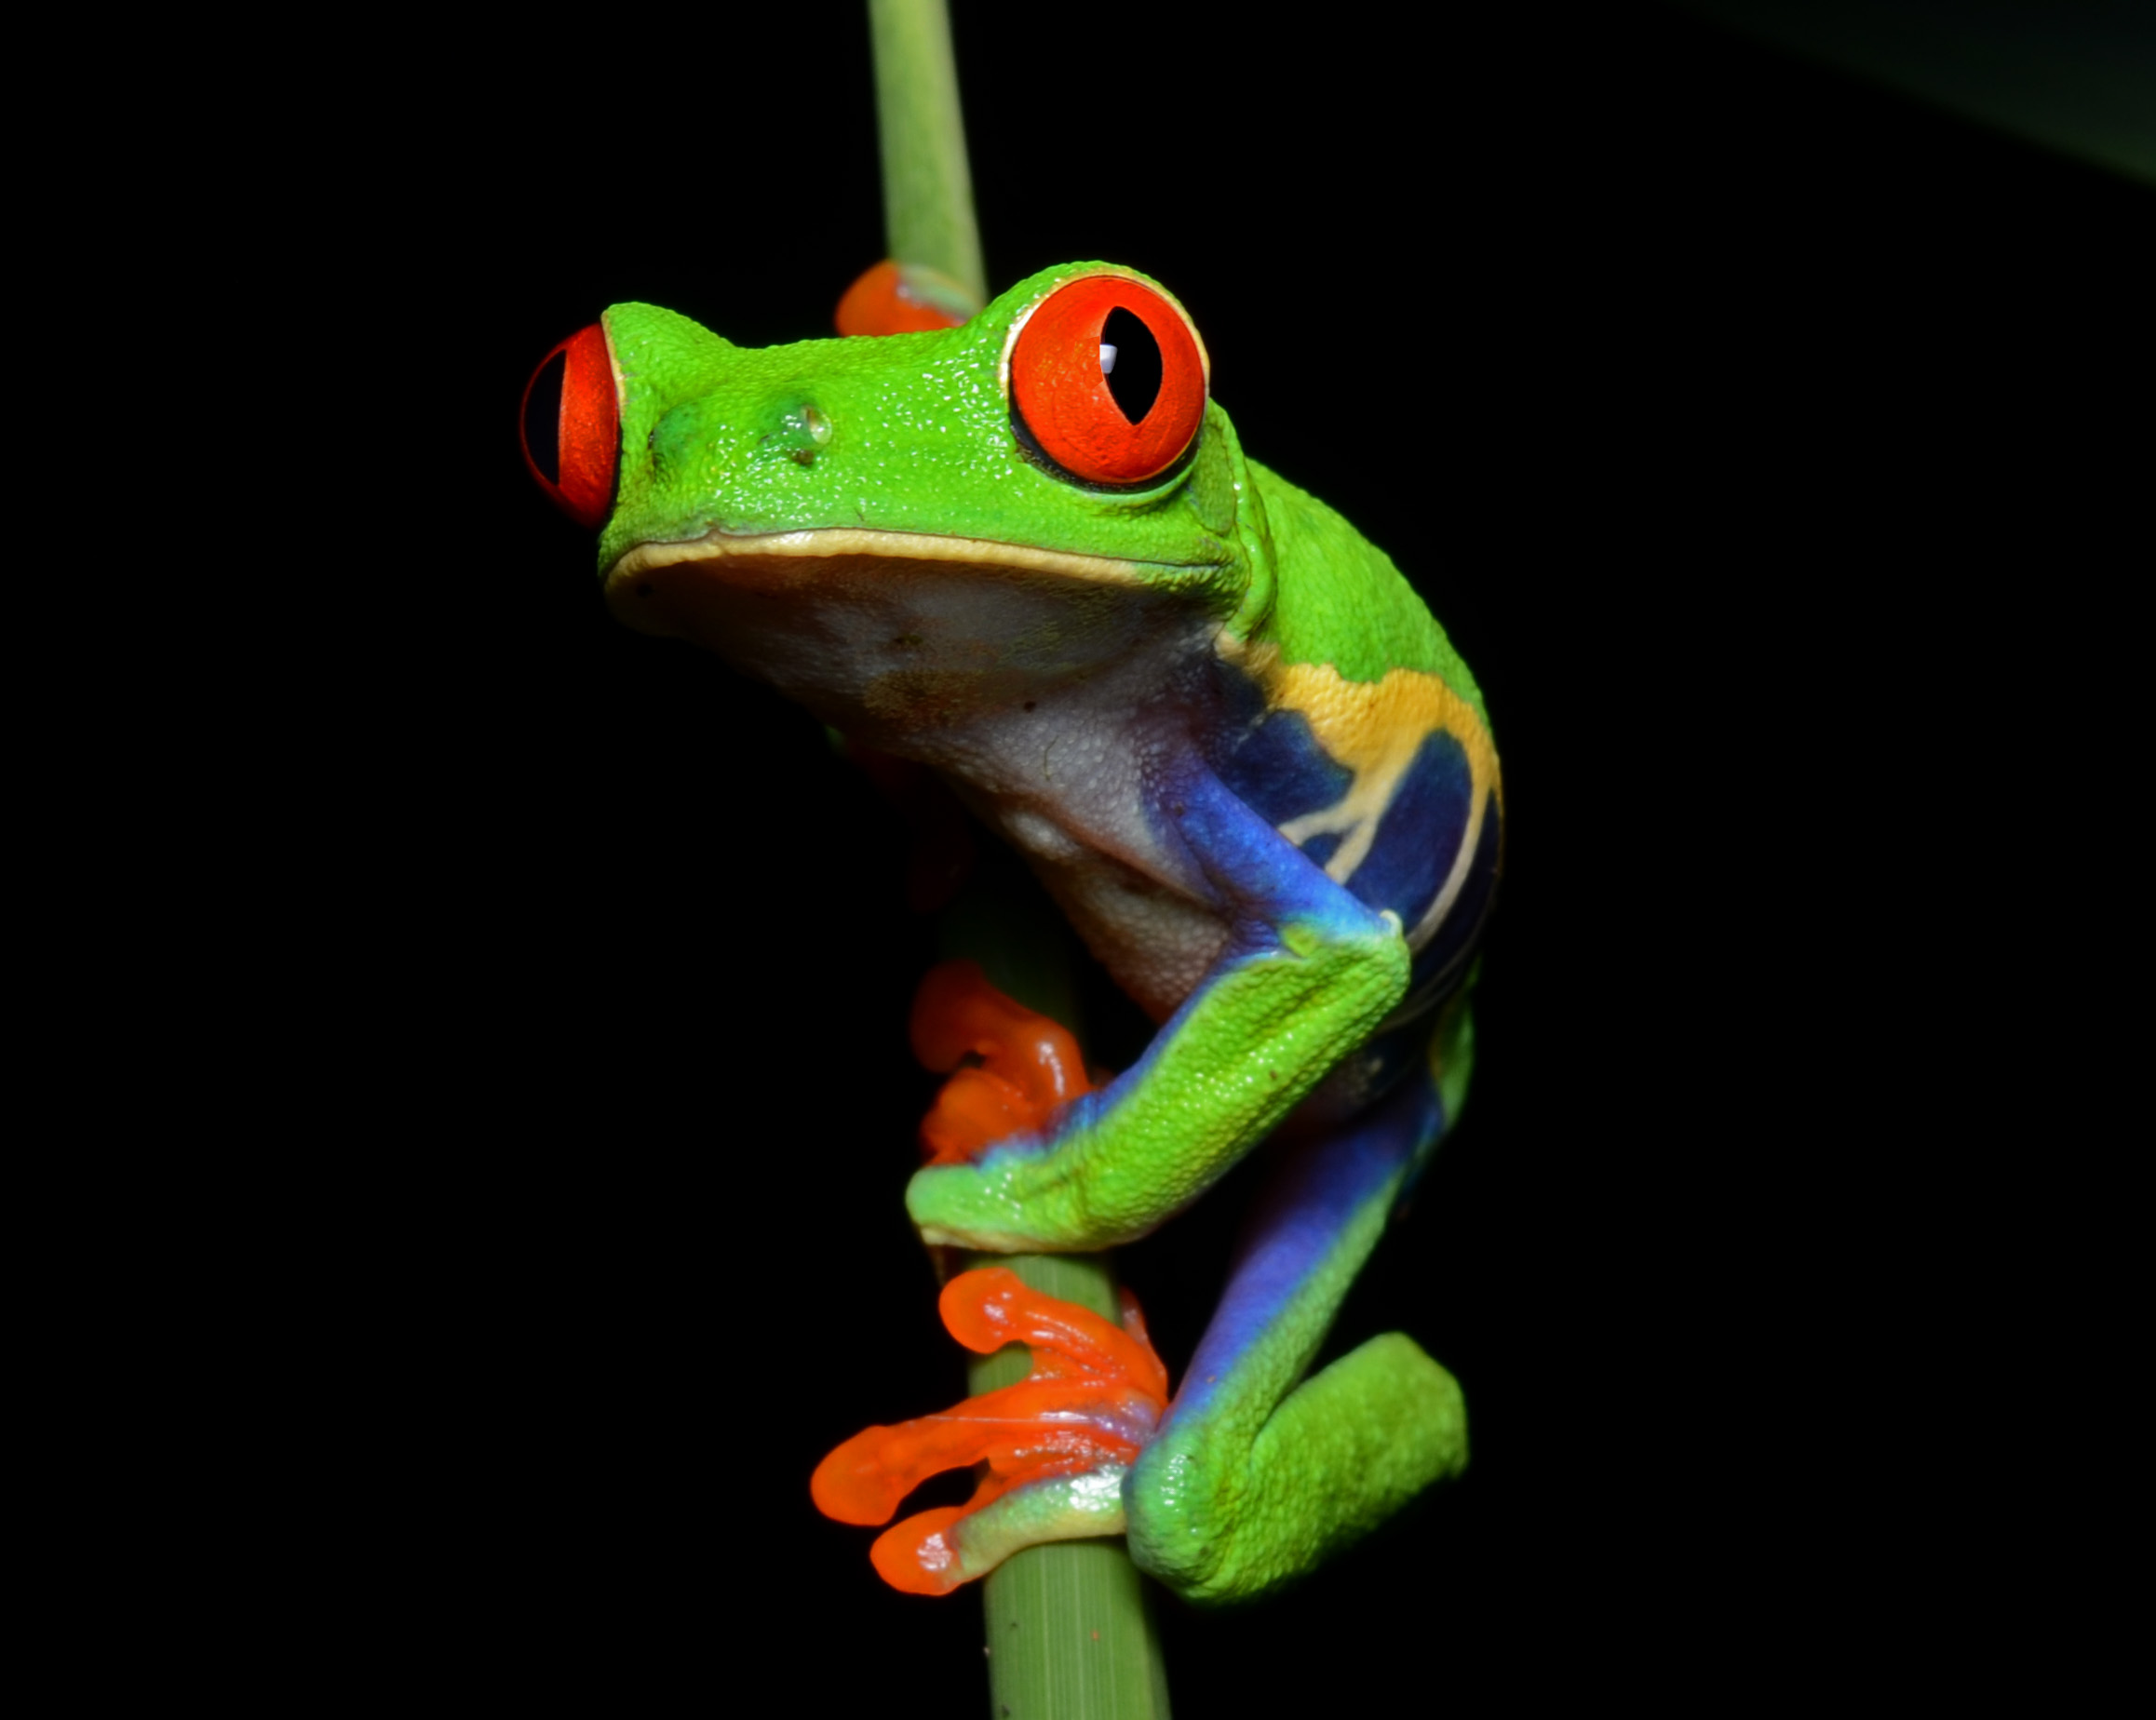 tree frog images - Google Search | Awww! I love it! | Pinterest ...